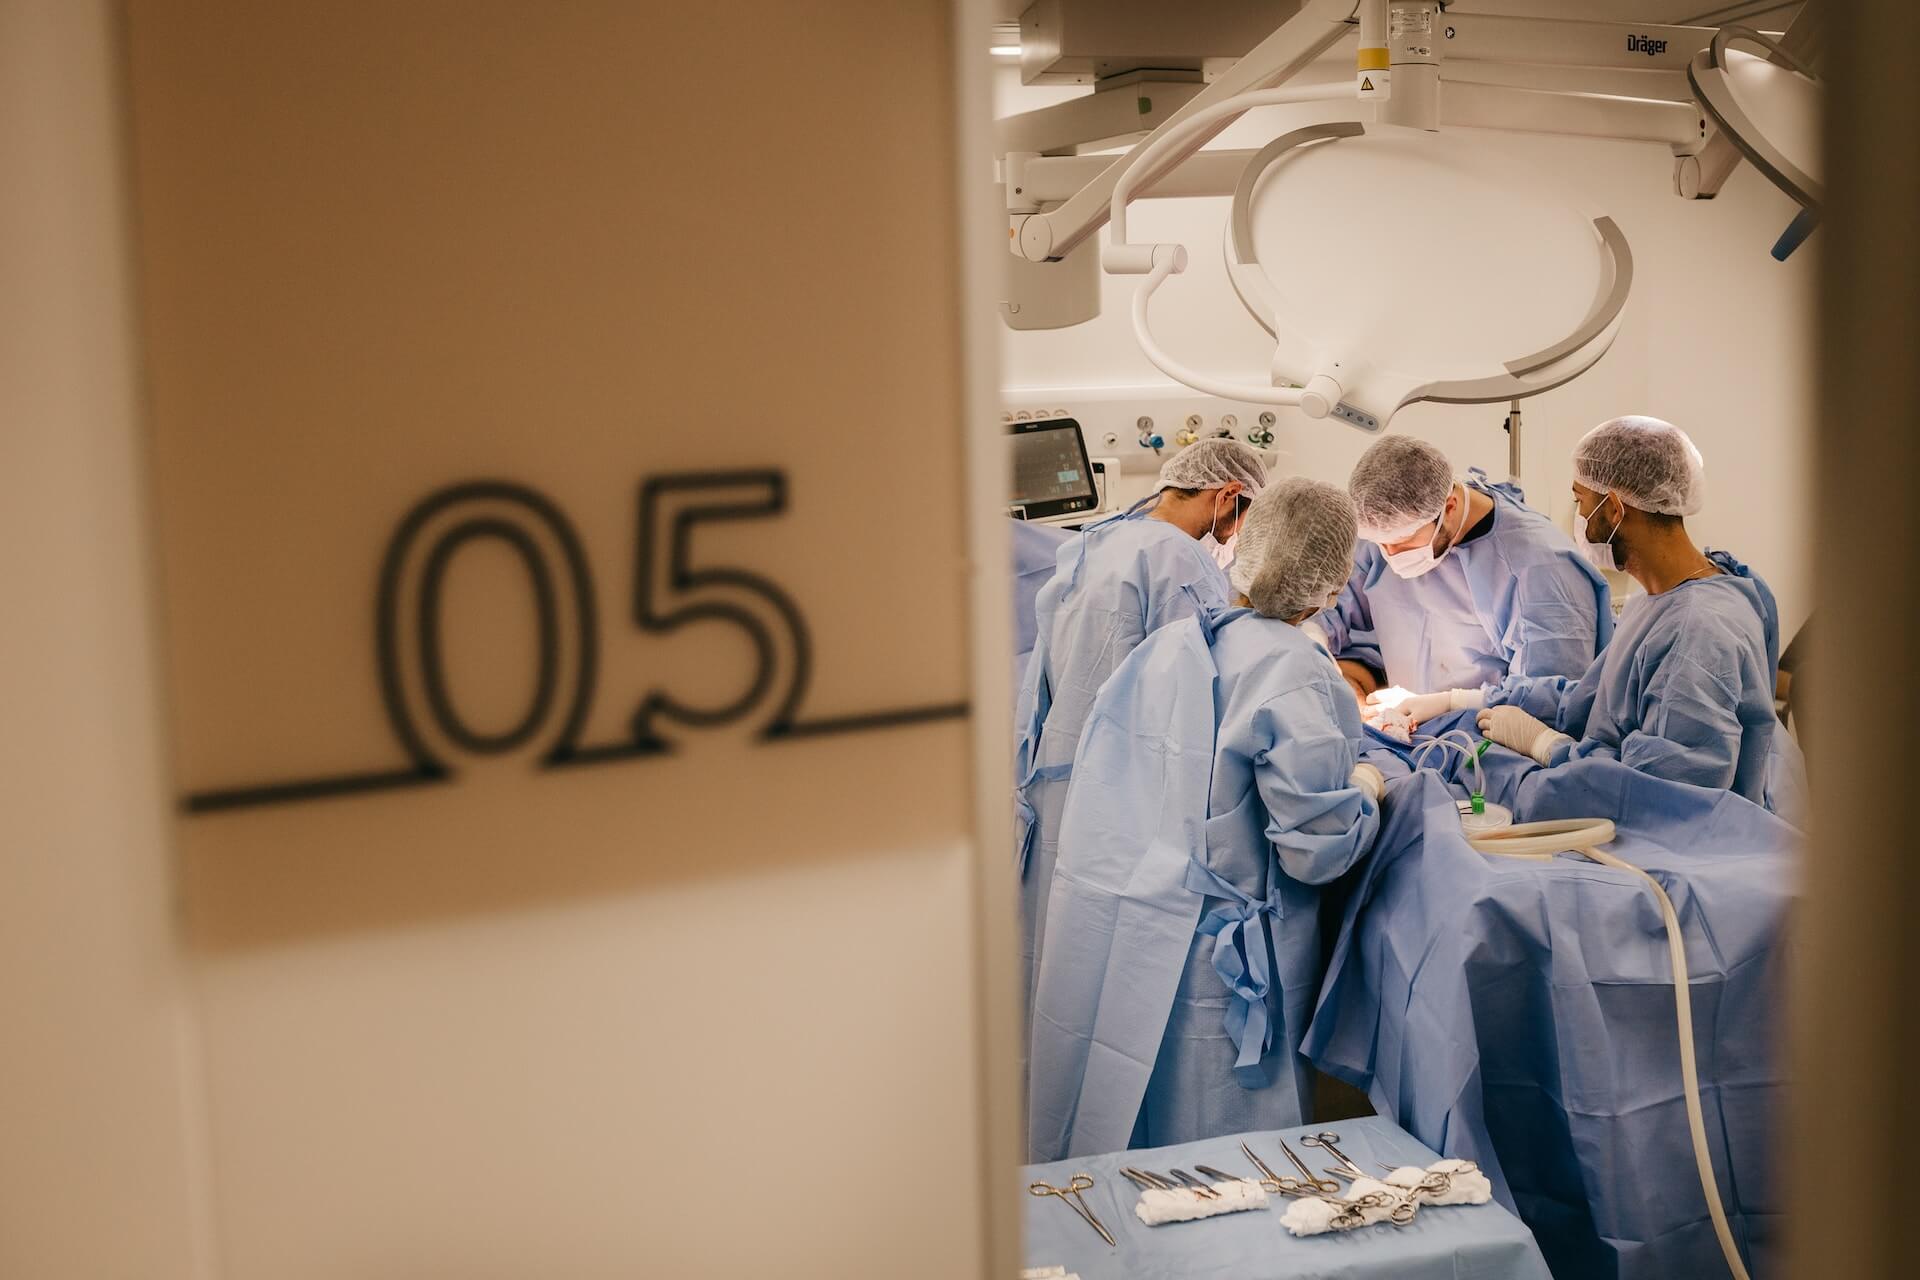 A group of surgeons in an operating theatre